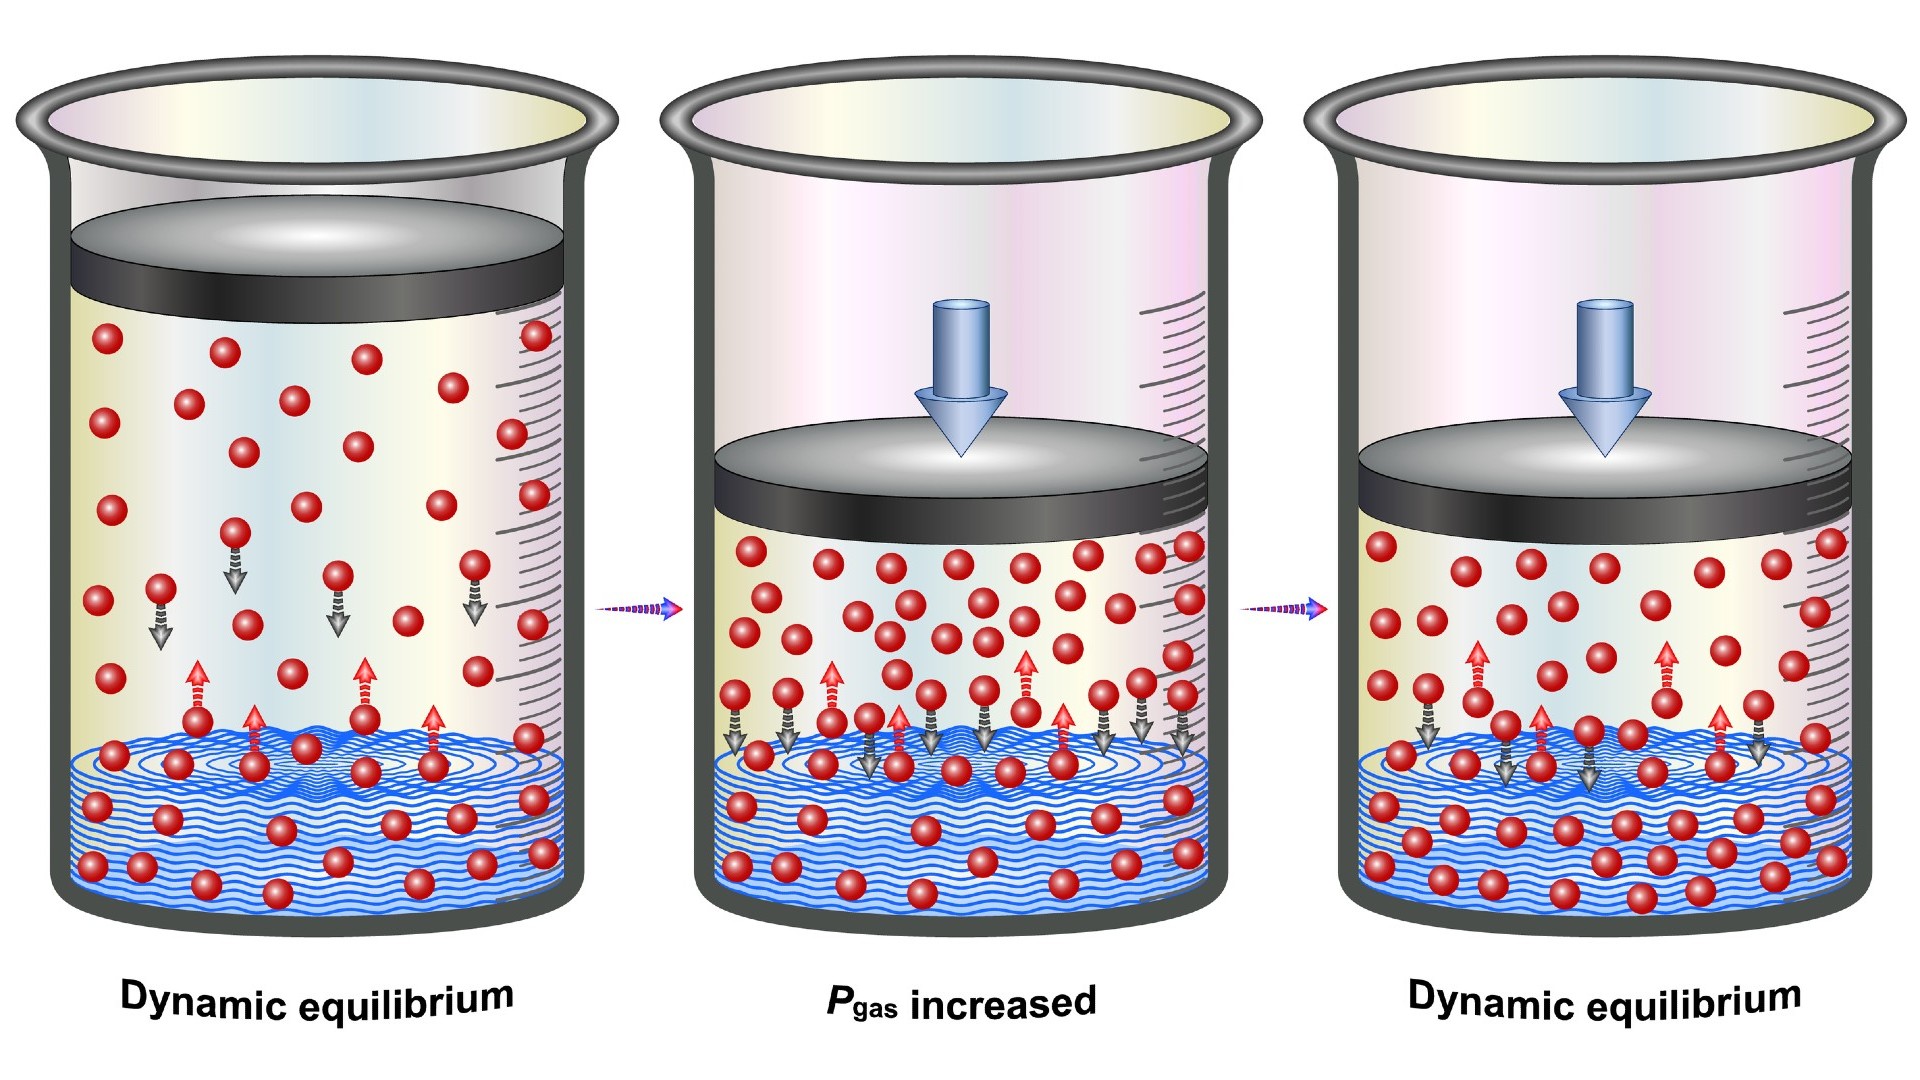 An illustration of the effect of pressure on the solubility of gases (known as Henry’s Law). There are 3 containers. The first container shows dynamic equilibrium – it’s full to the top with liquid with a lid on and the gas particles equally spaced out. The second container shows an increase in gas pressure – the lid is now halfway down the container and the gas particles are tightly packed together in the liquid. The third container shows dynamic equilibrium again – the lid is halfway down the container and the number of gas particles are now less and are again spaced squally apart.